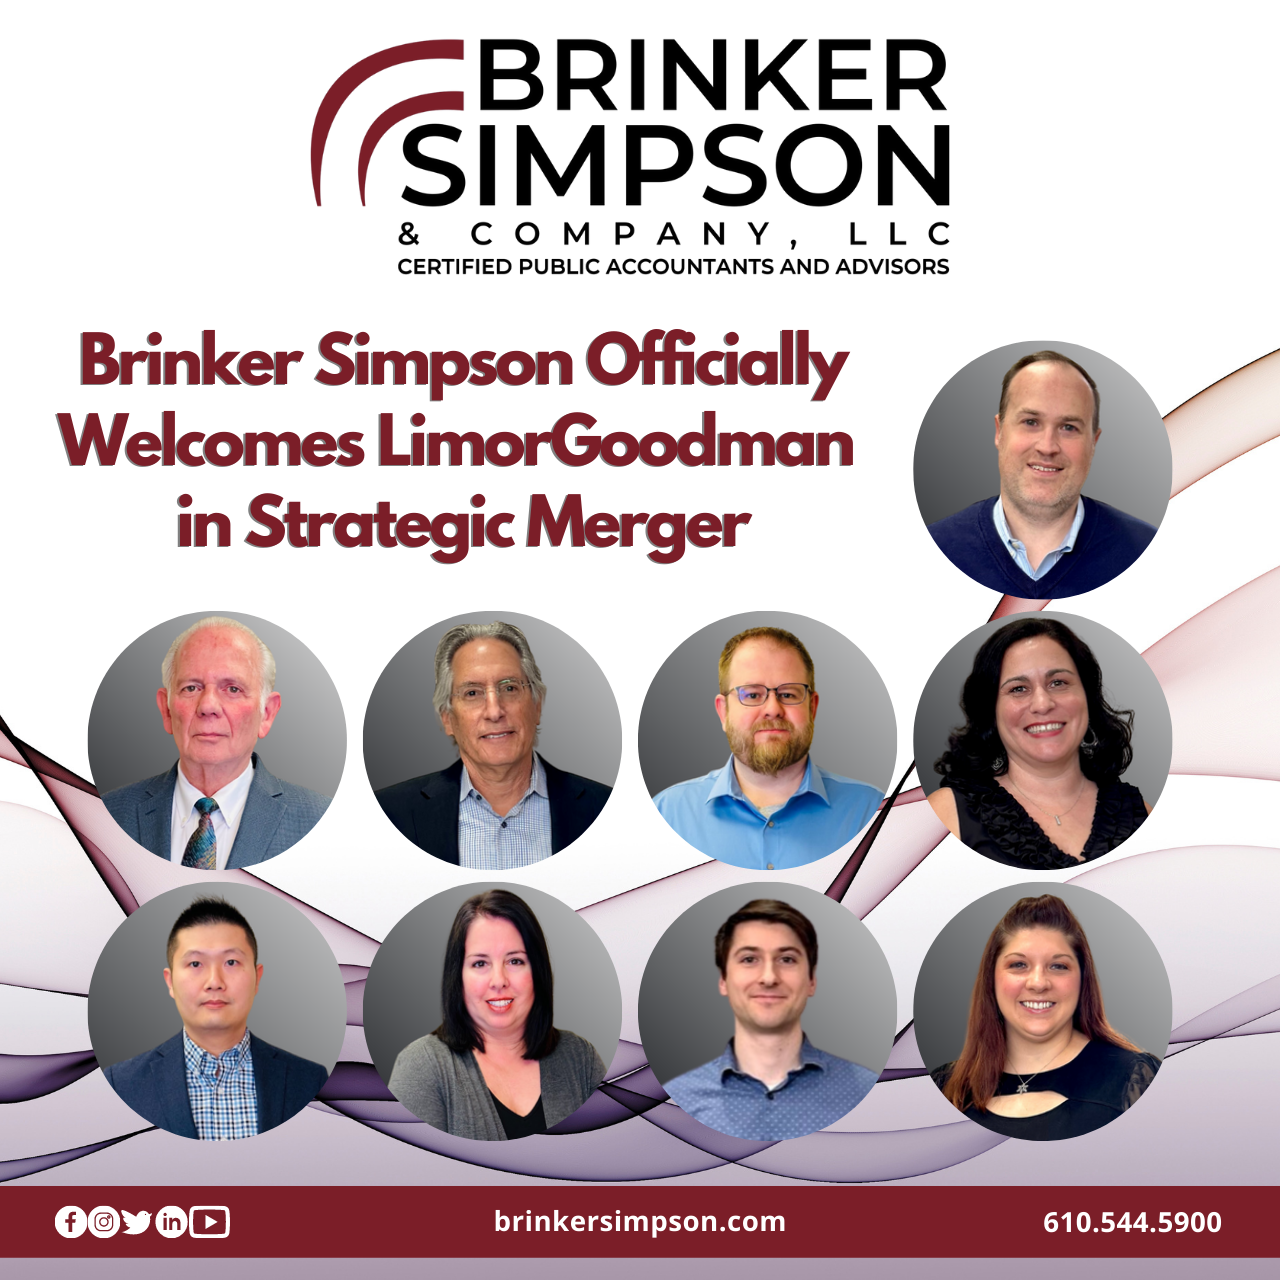 Brinker Simpson Officially Welcomes LimorGoodman In Strategic Merger